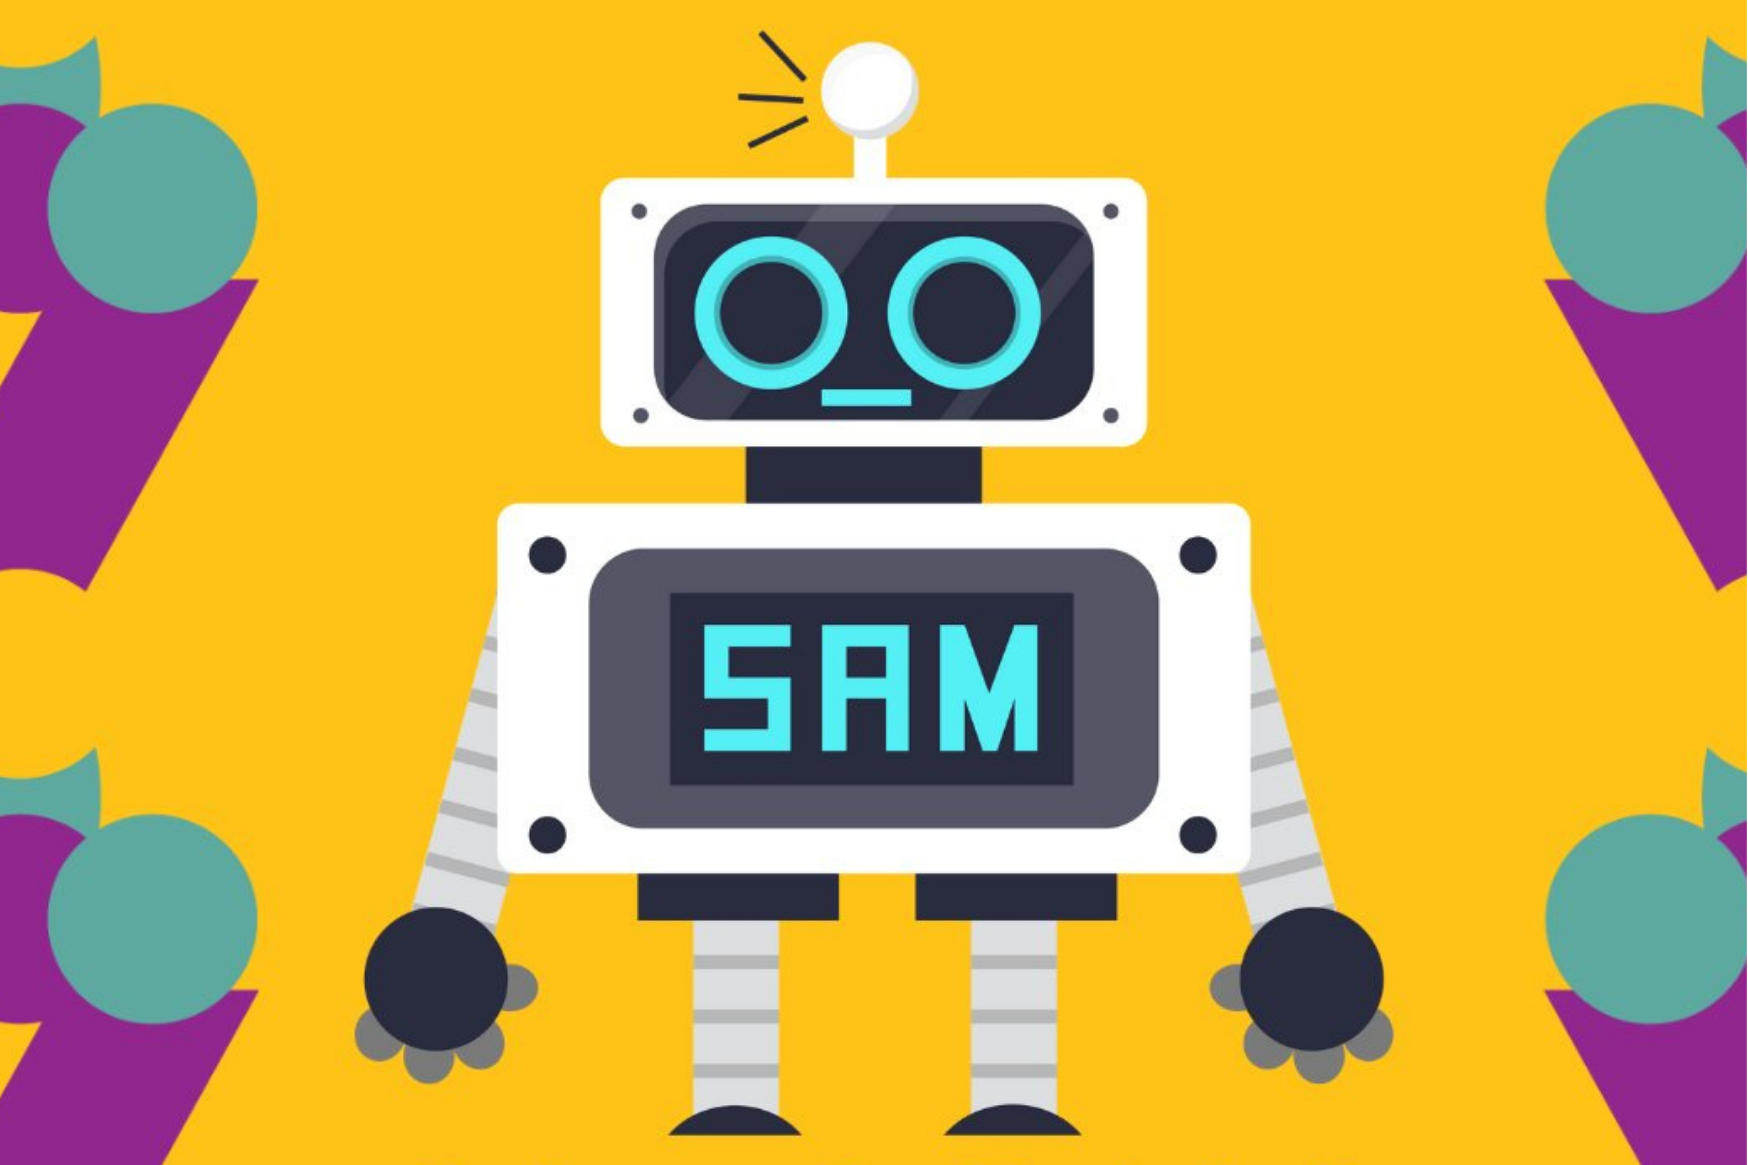 Illustration of a small white robot with the word "SAM" on it on a yellow background